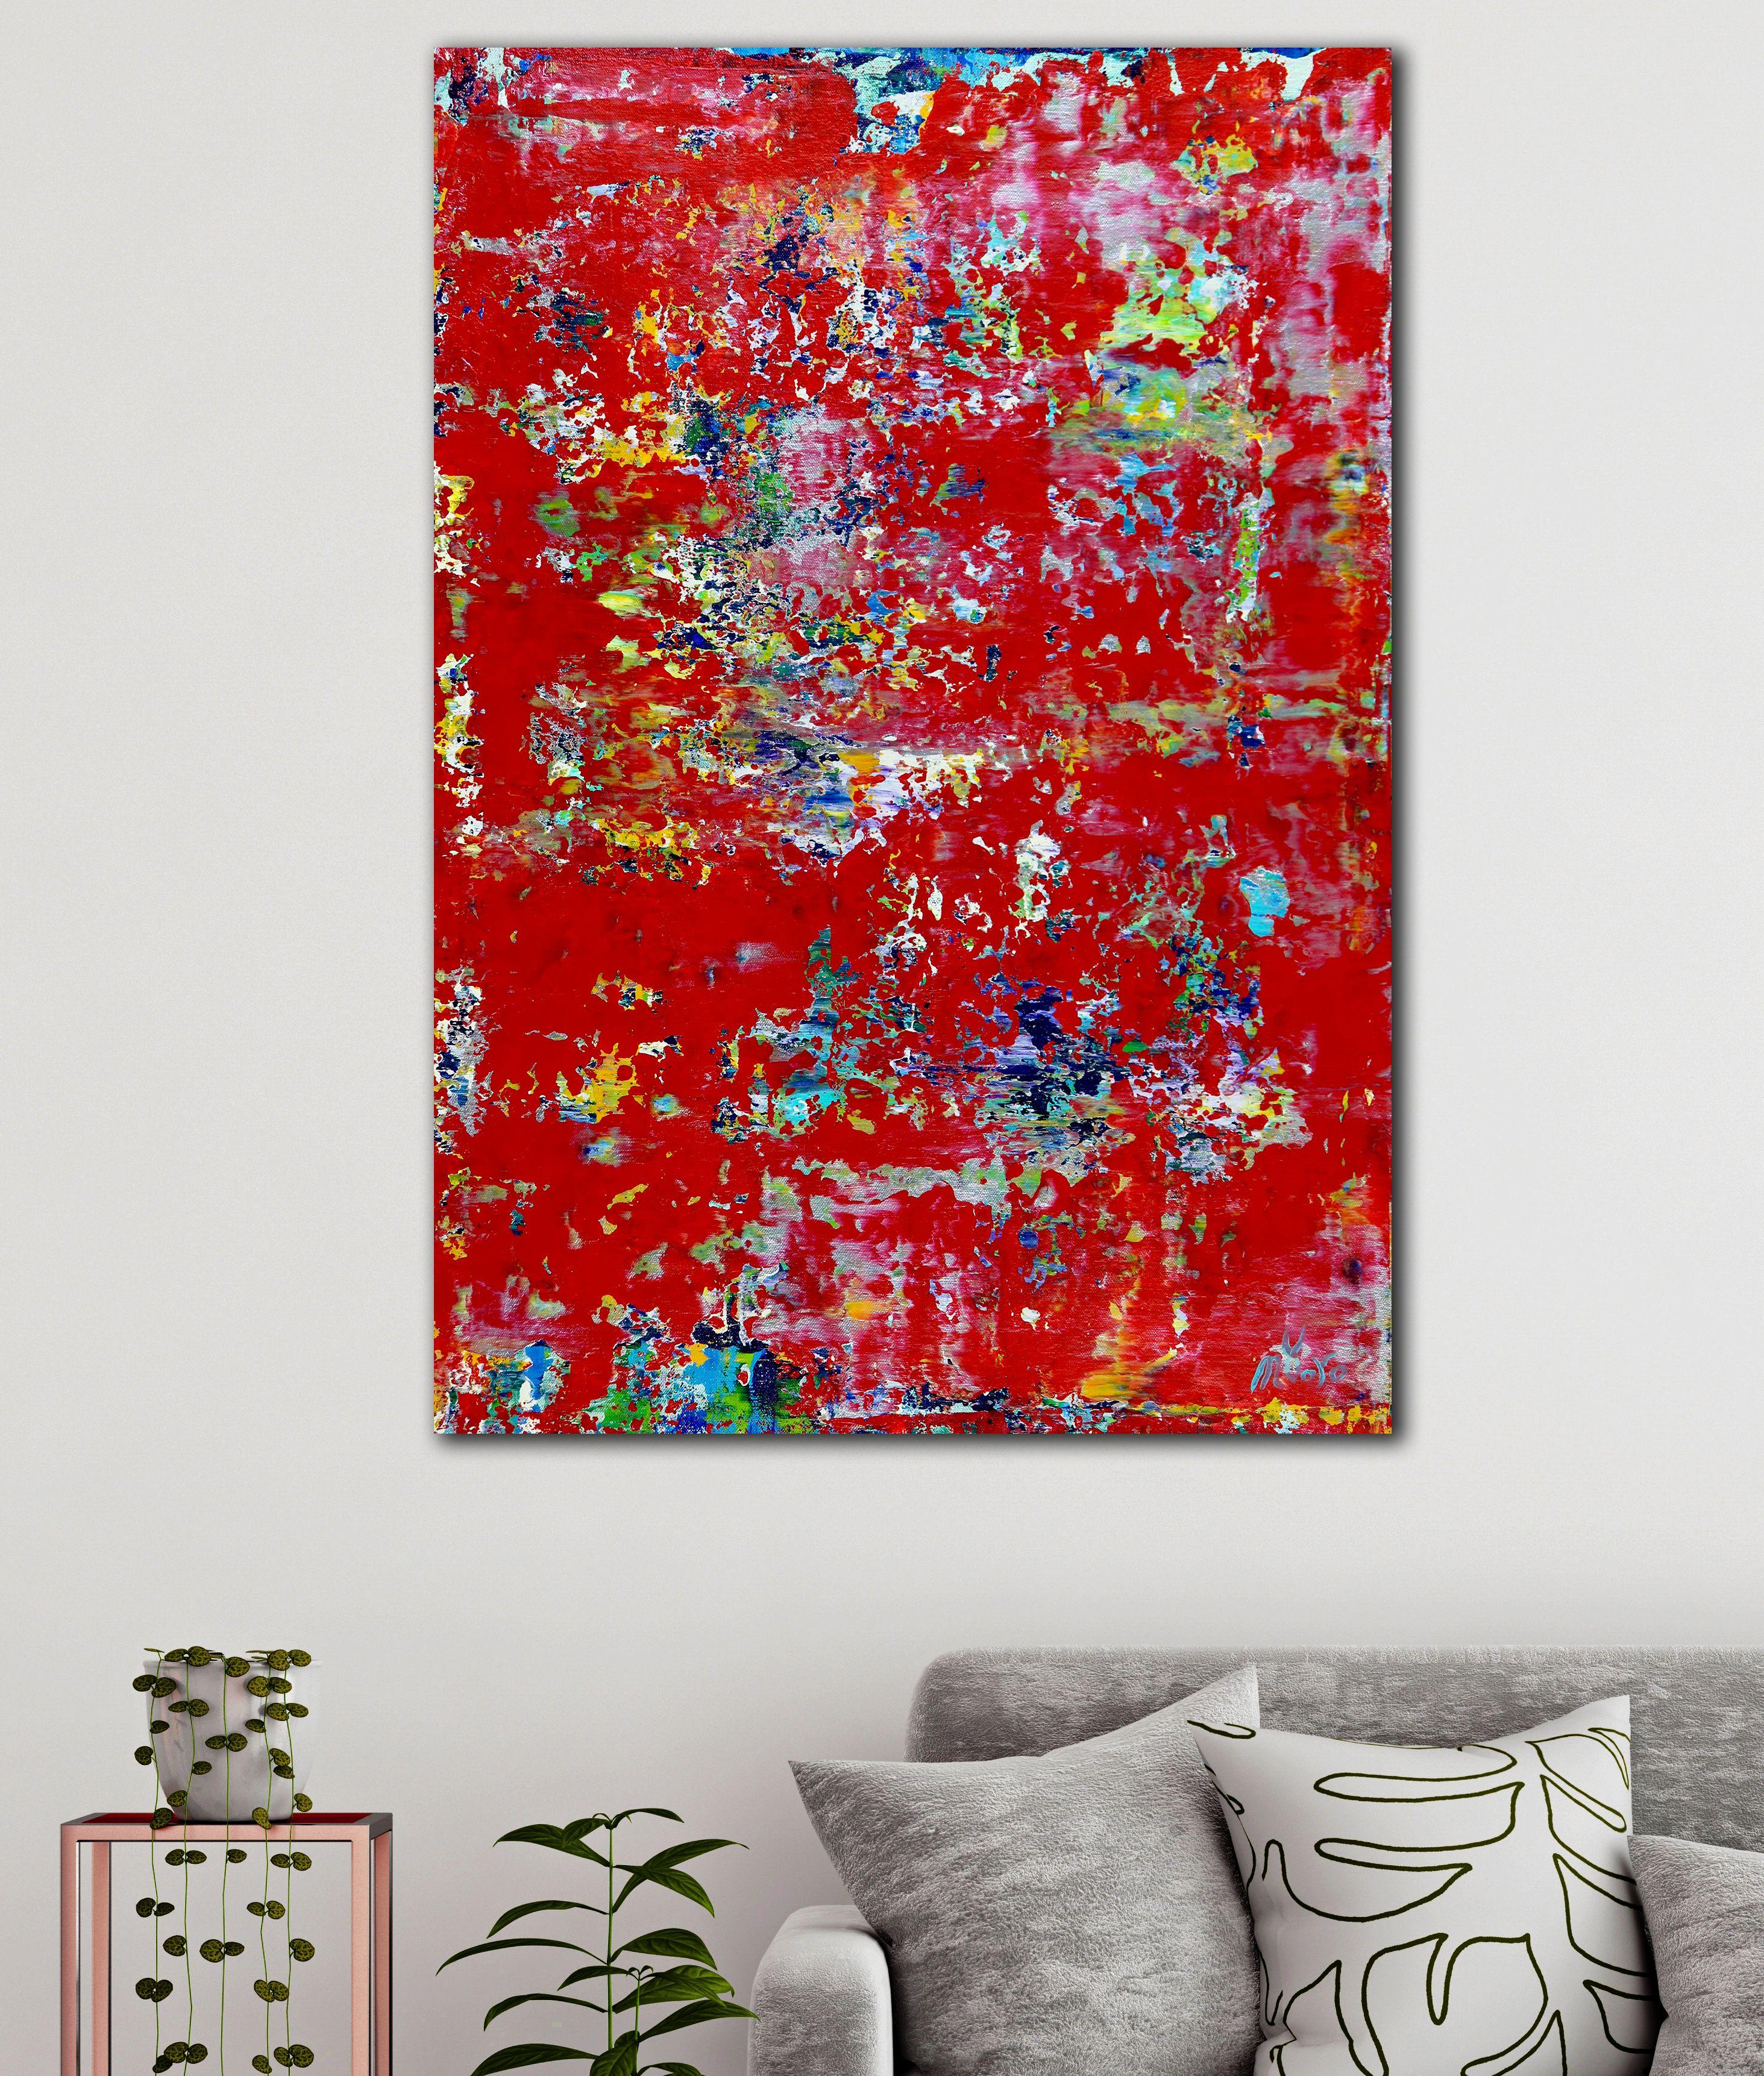 Inspired by fiery Hawaiian volcanoes. Layers of mineral like colors and vibrancy only found in earth formations. Very expressive and intricate color field.    I include a certificate of authenticity that lists the materials as well as when the